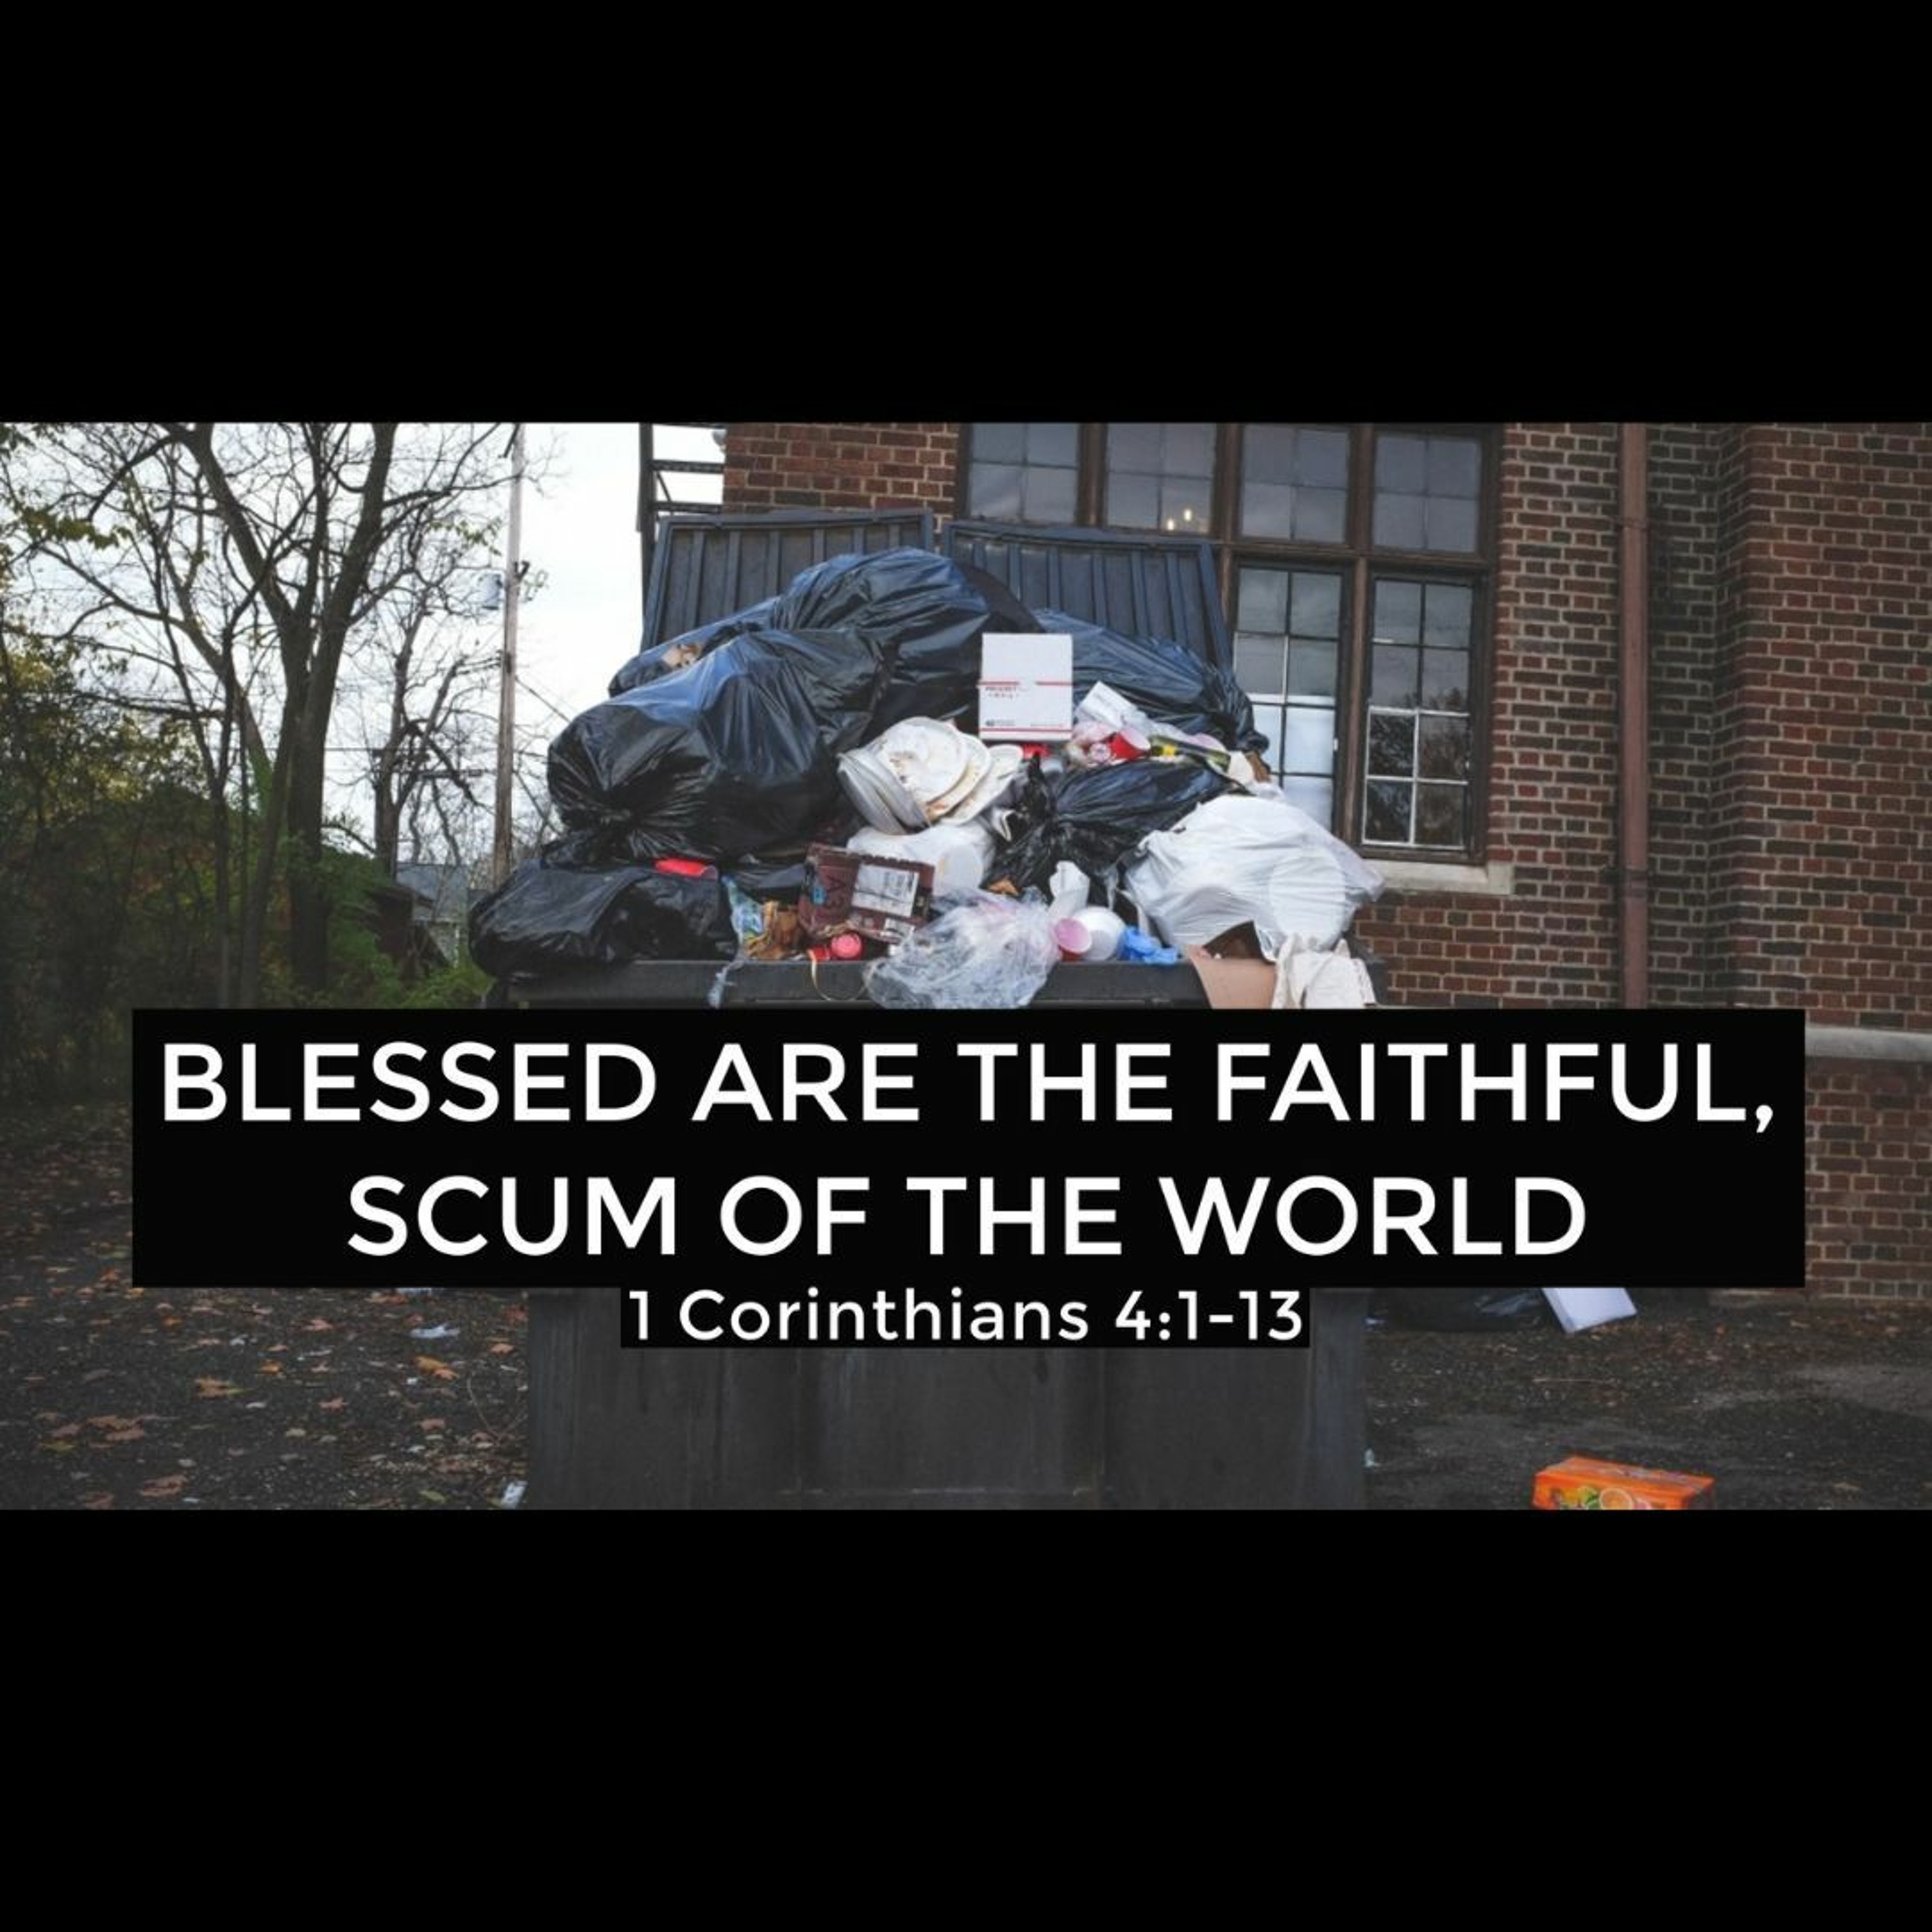 Blessed are the Faithful, Scum of the World (1 Cor 4:1-13)